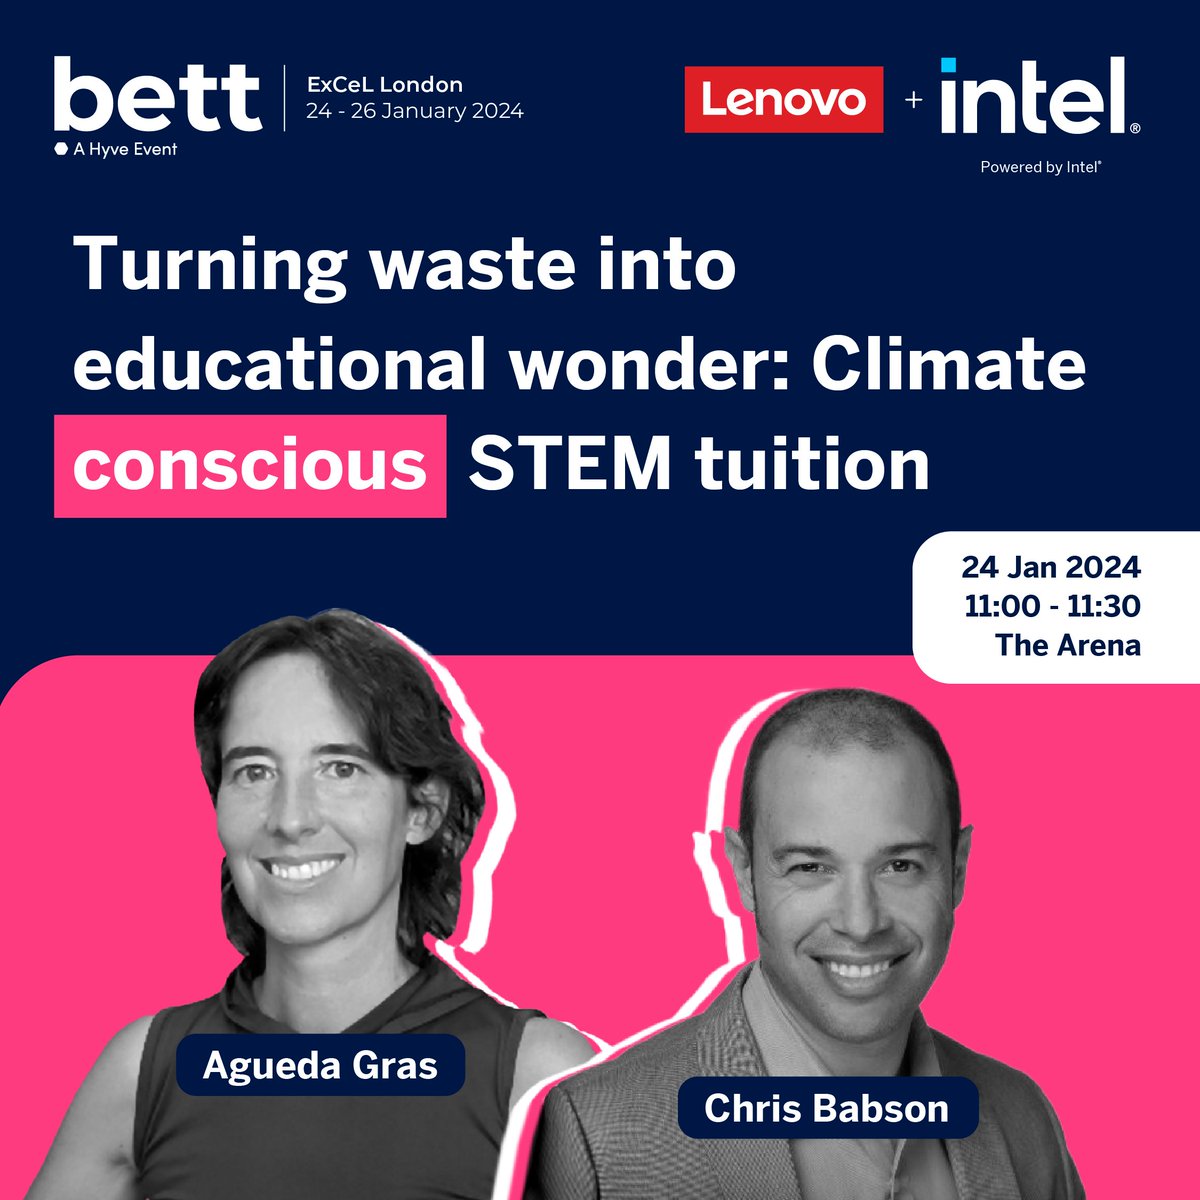 Join Lenovo & European Schoolnet at 11 am for an eco-friendly classroom revolution! 💡 Learn about integrating sustainability in STEM & discover Lenovo's Turning Waste into Educational Wonder project—turning recycled boxes into inspiration! 🔄